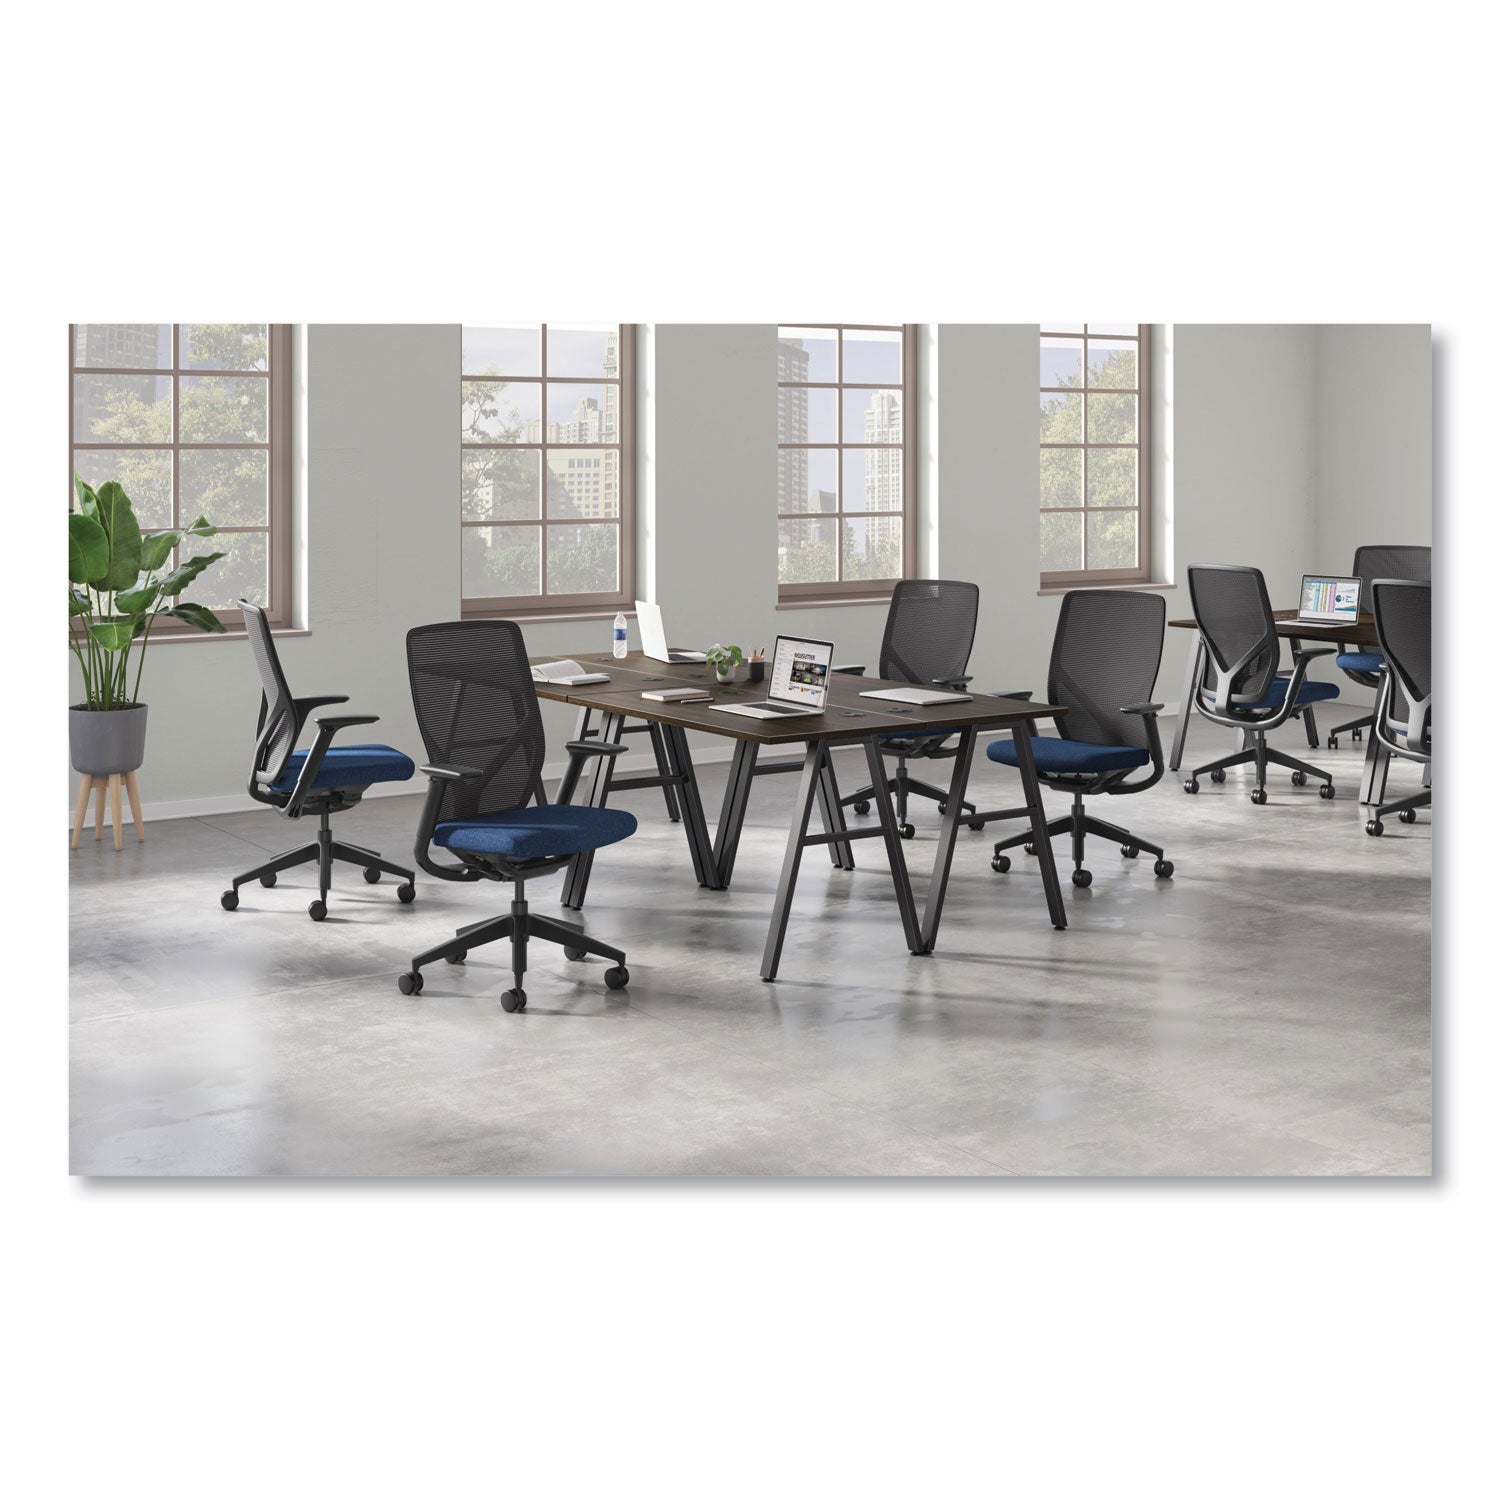 flexion-mesh-back-chair-supports-up-to-300-lb-1481-to-197-seat-ht-navy-seat-black-back-base-ships-in-7-10-bus-days_honfxtsamax13nl - 3